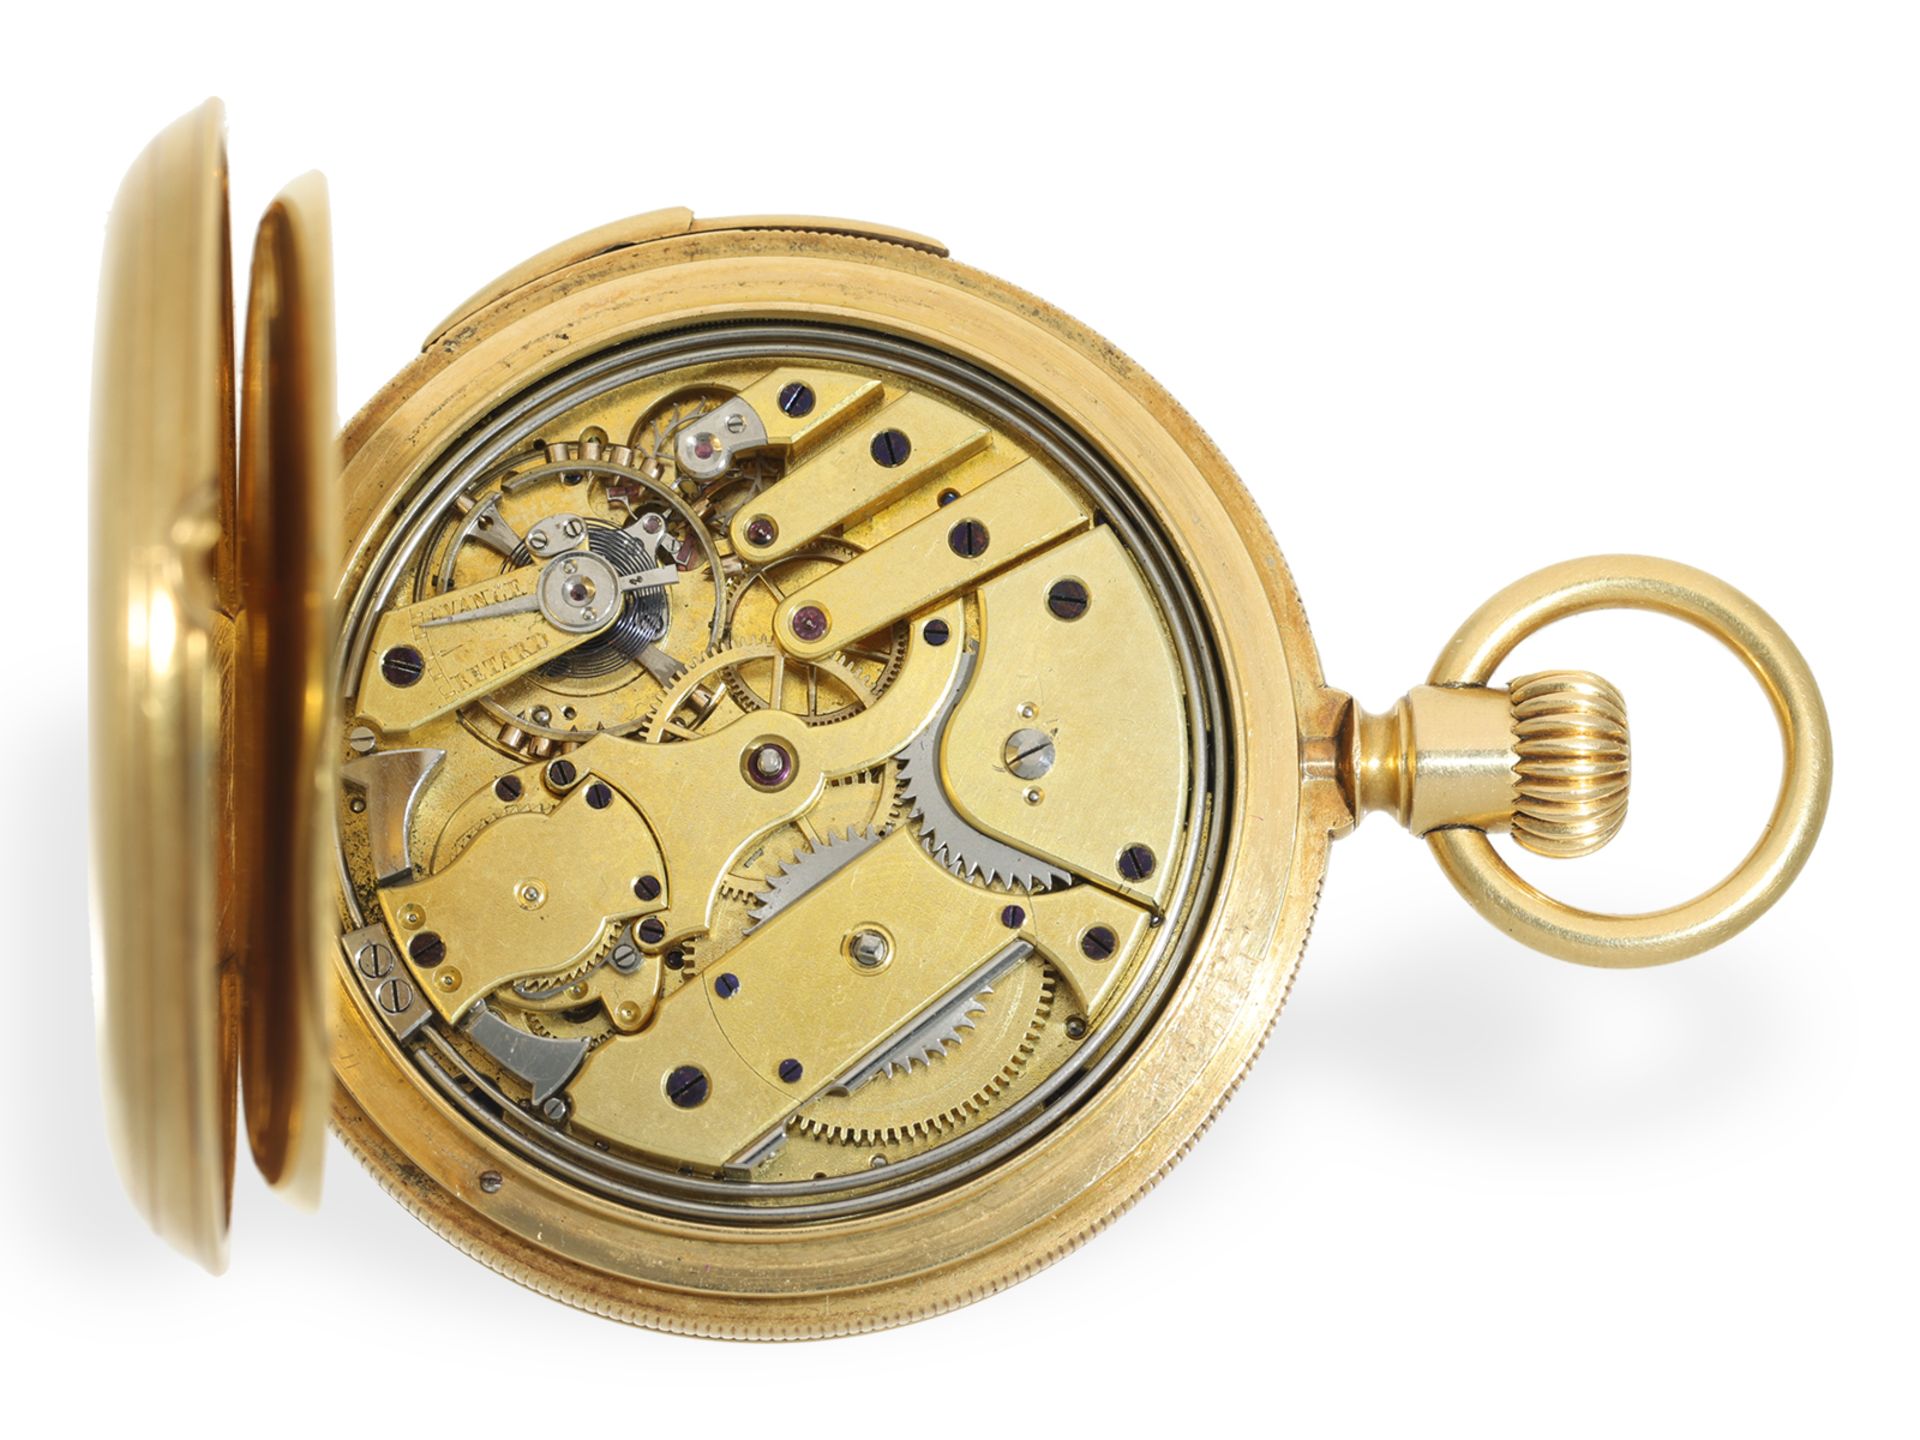 Pocket watch: historically interesting Patek Philippe gold hunting case watch with 5-minute repeater - Image 2 of 7